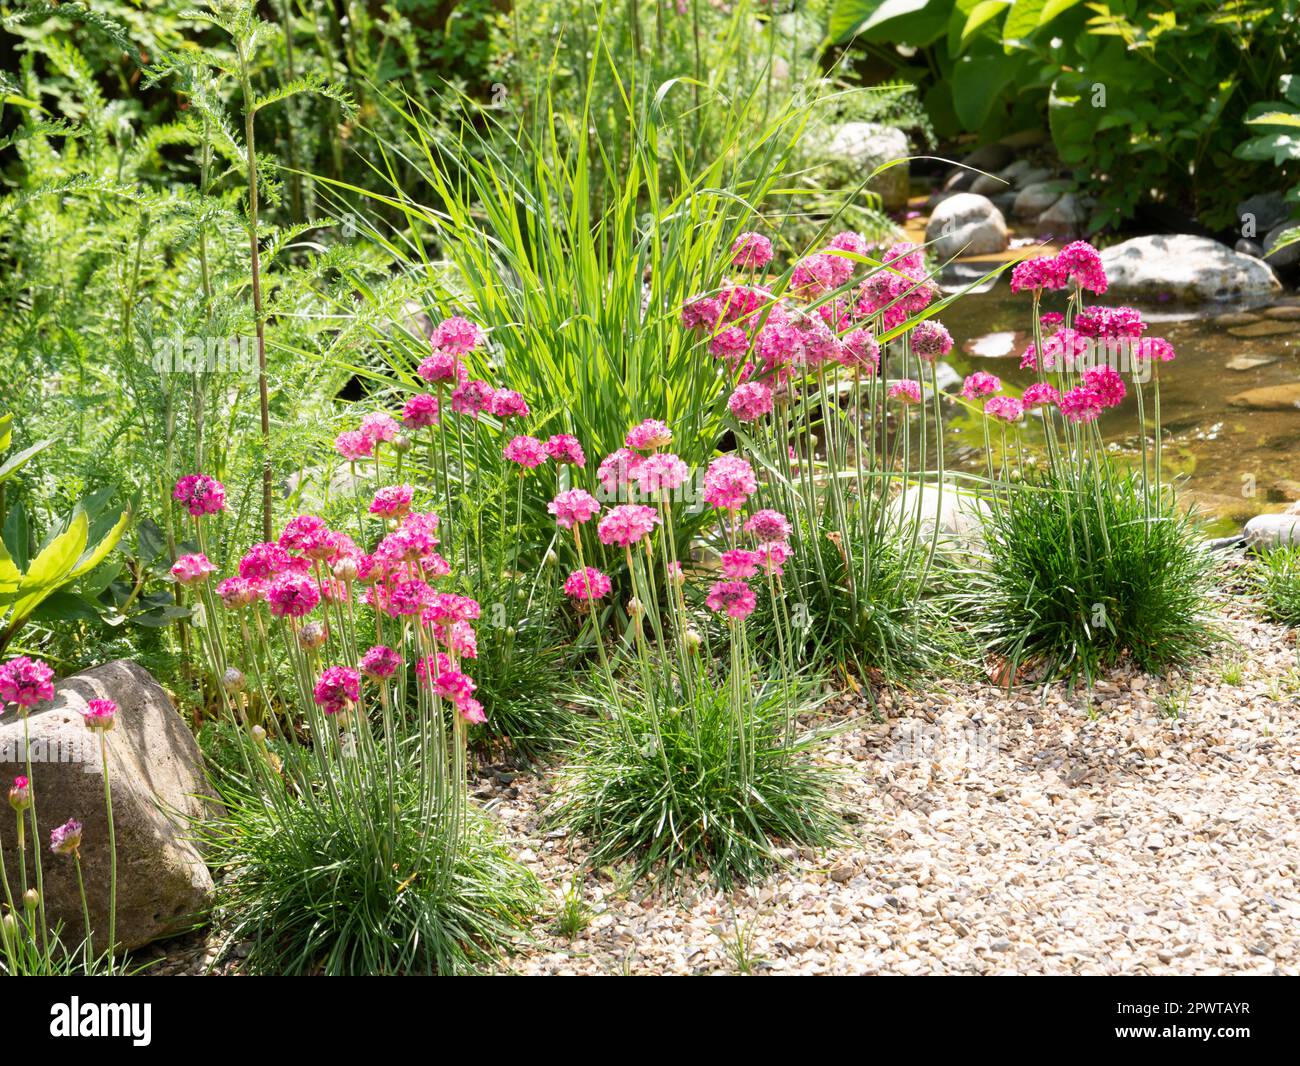 Sea pink or sea thrift, Armeria maritima, group of plants with deep pink flowers in garden, Netherlands Stock Photo